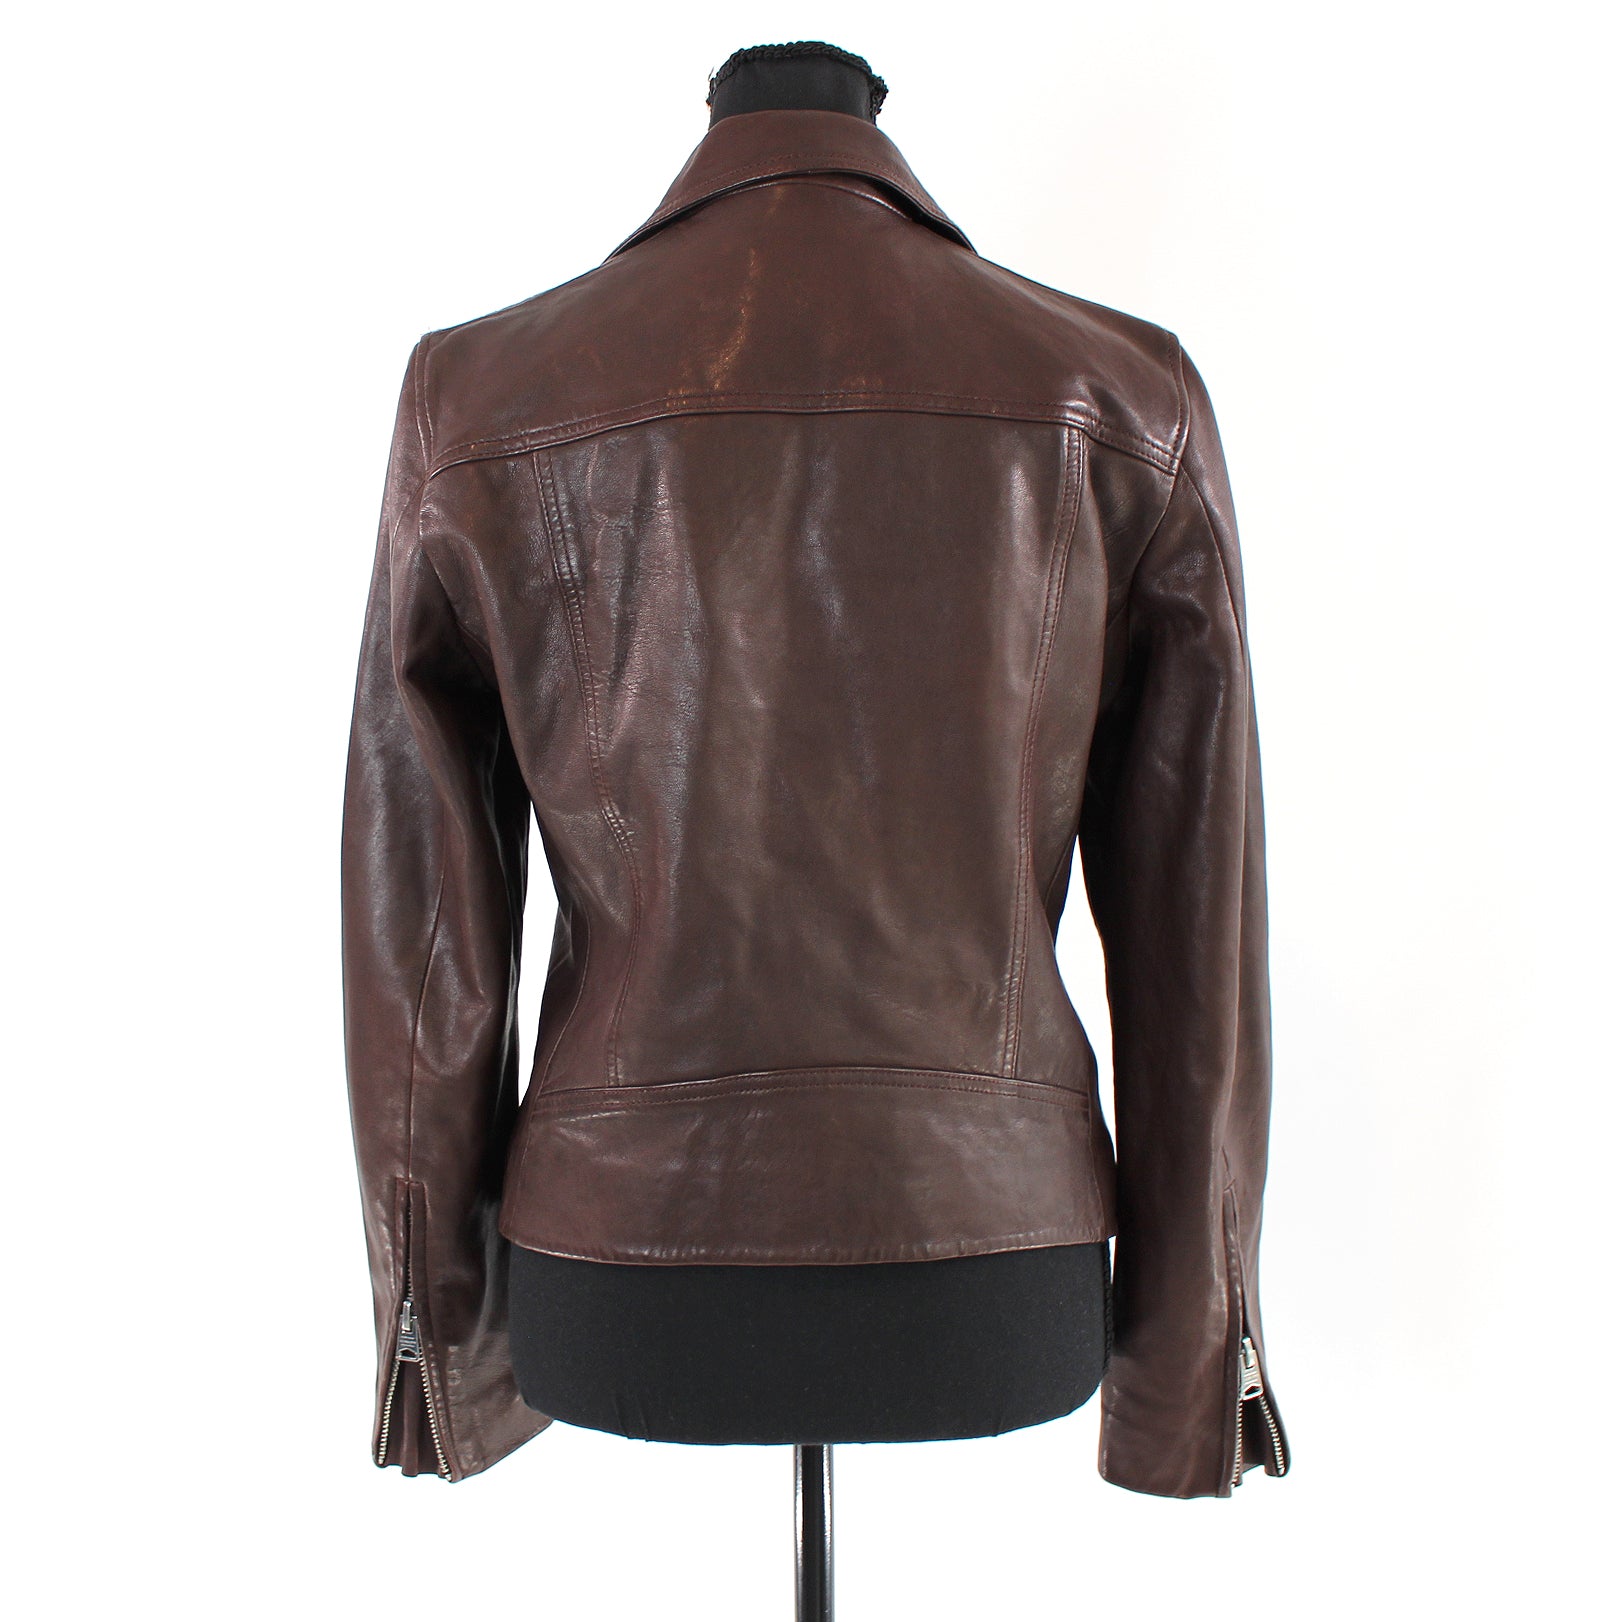 All Saints Dalby Oxblood York Jacket The Leather Zip-Up New – Closet Biker Brown